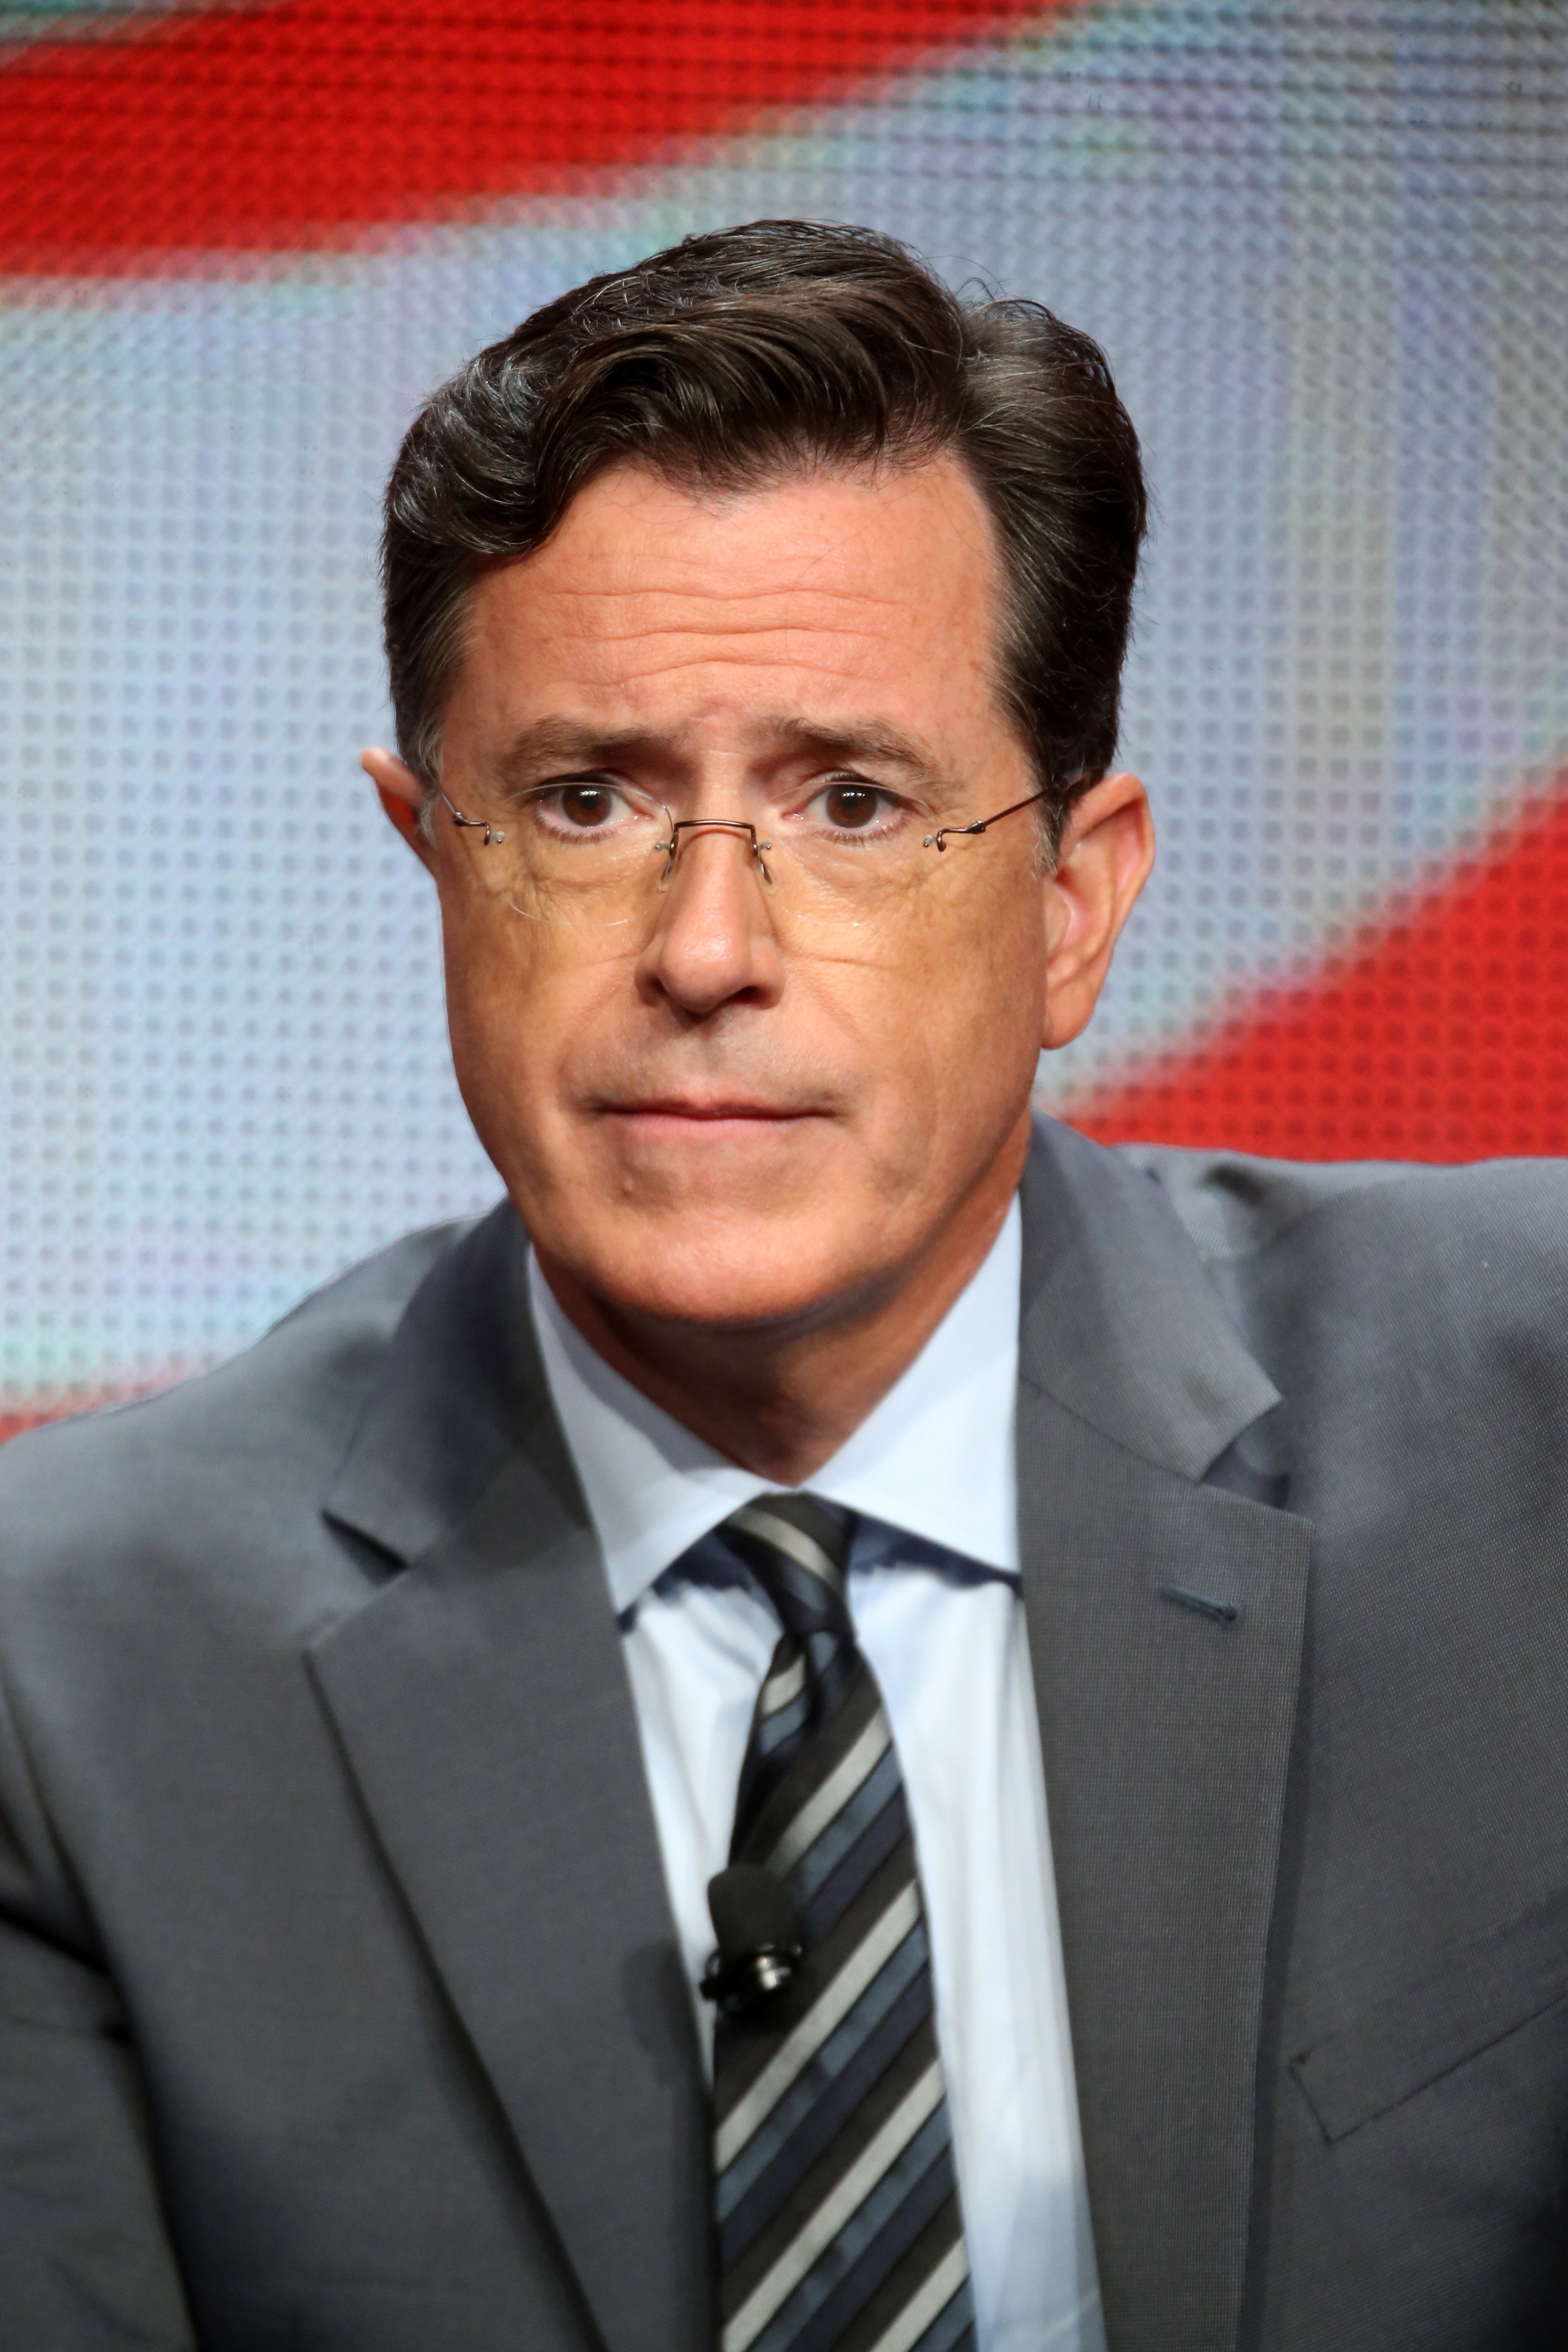 Stephen Colbert at the 2015 Summer TCA Tour at The Beverly Hilton Hotel on August 10, 2015 | Photo: GettyImages